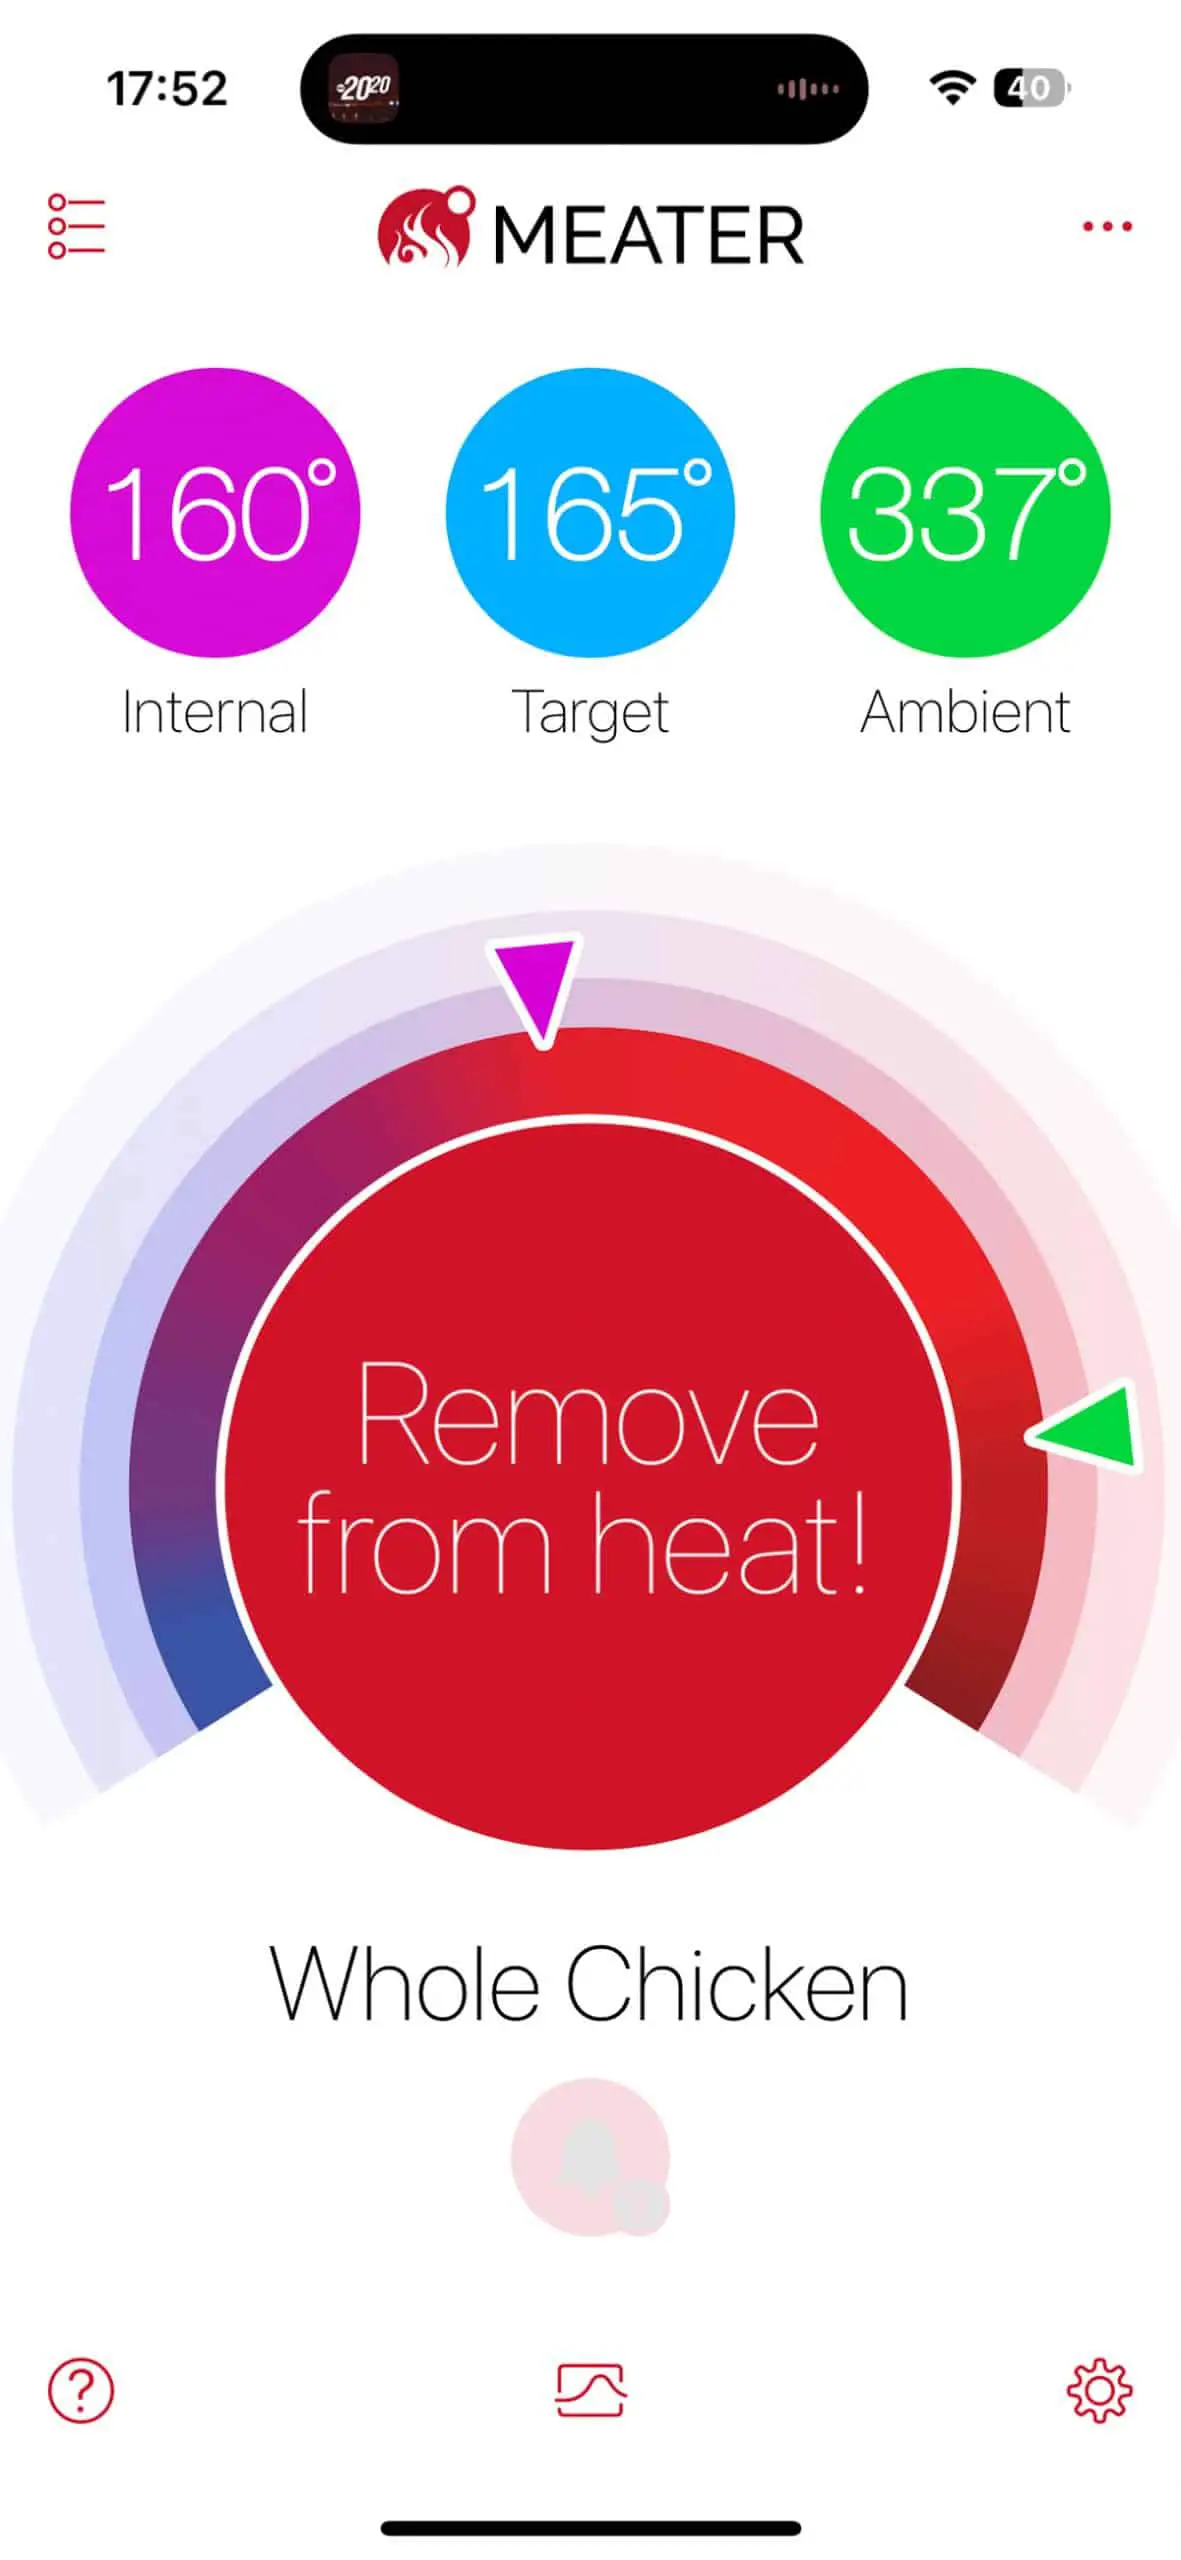 A screenshot from the MEATER app with the message to remove from heat and the following temperatures: 160F internal, 165F target, and 337F ambient.